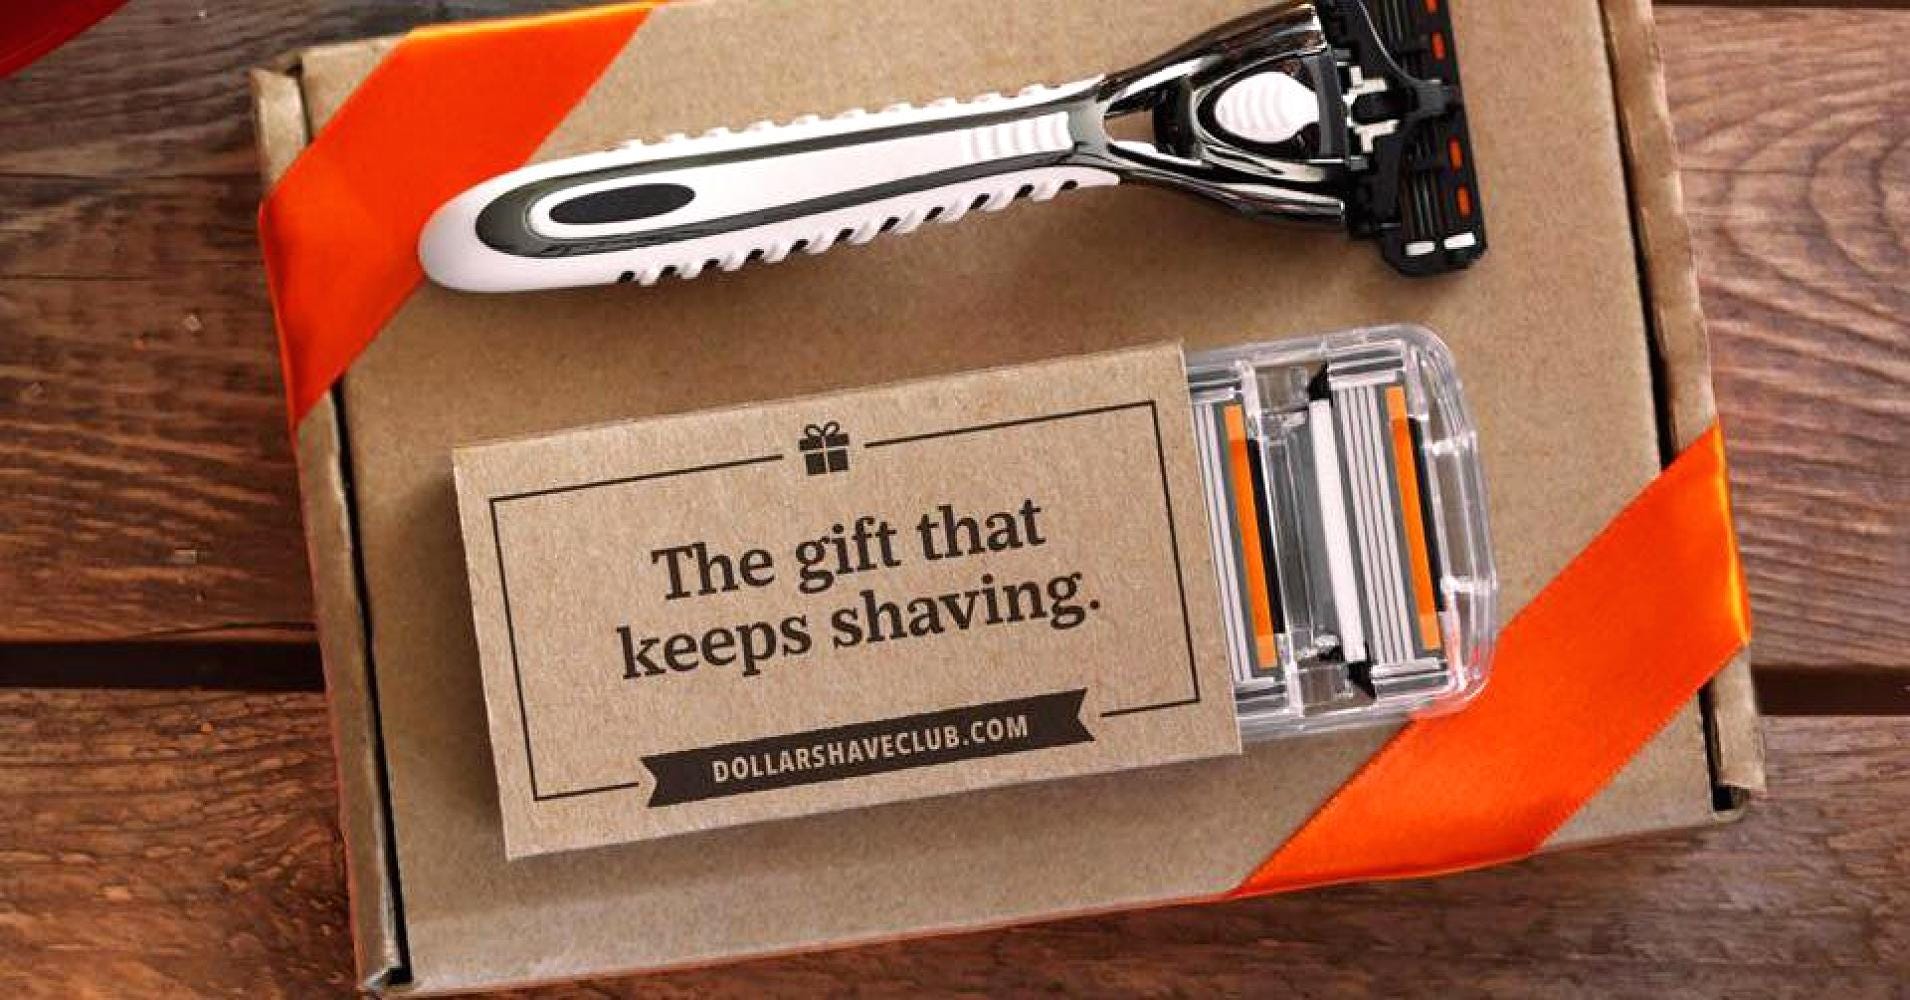 On the growth of Dollar Shave Club to $1BN acquisition